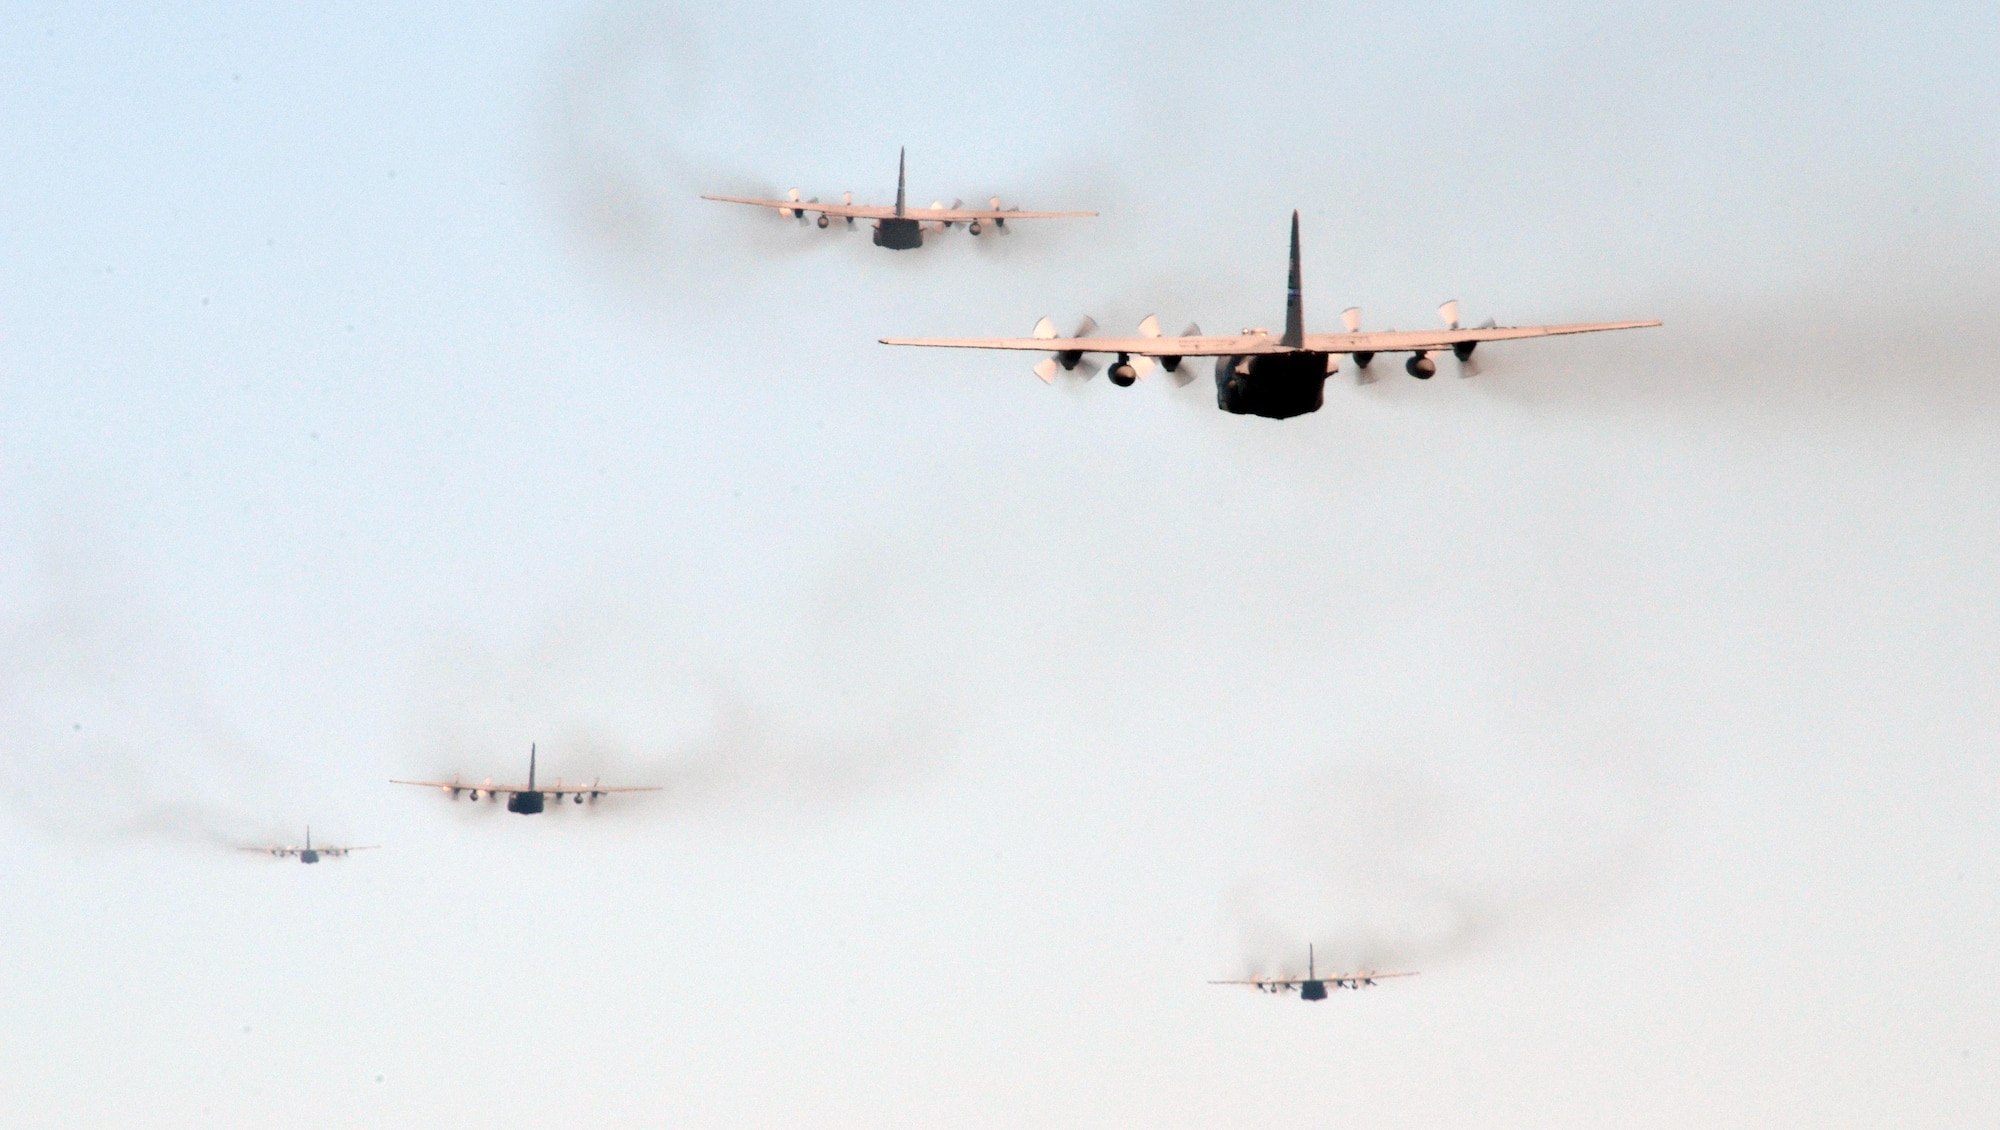 C-130 Hercules from the 700th Airlift Squadron take off in formation from Dobbins Air Reserve Base, Ga., on July 9, 2016. The 94th Airlift Wing formation conducted proficiency training missions over downtown Atlanta and much of the metro area. (U.S. Air Force photo/Tech. Sgt. Kelly Goonan)